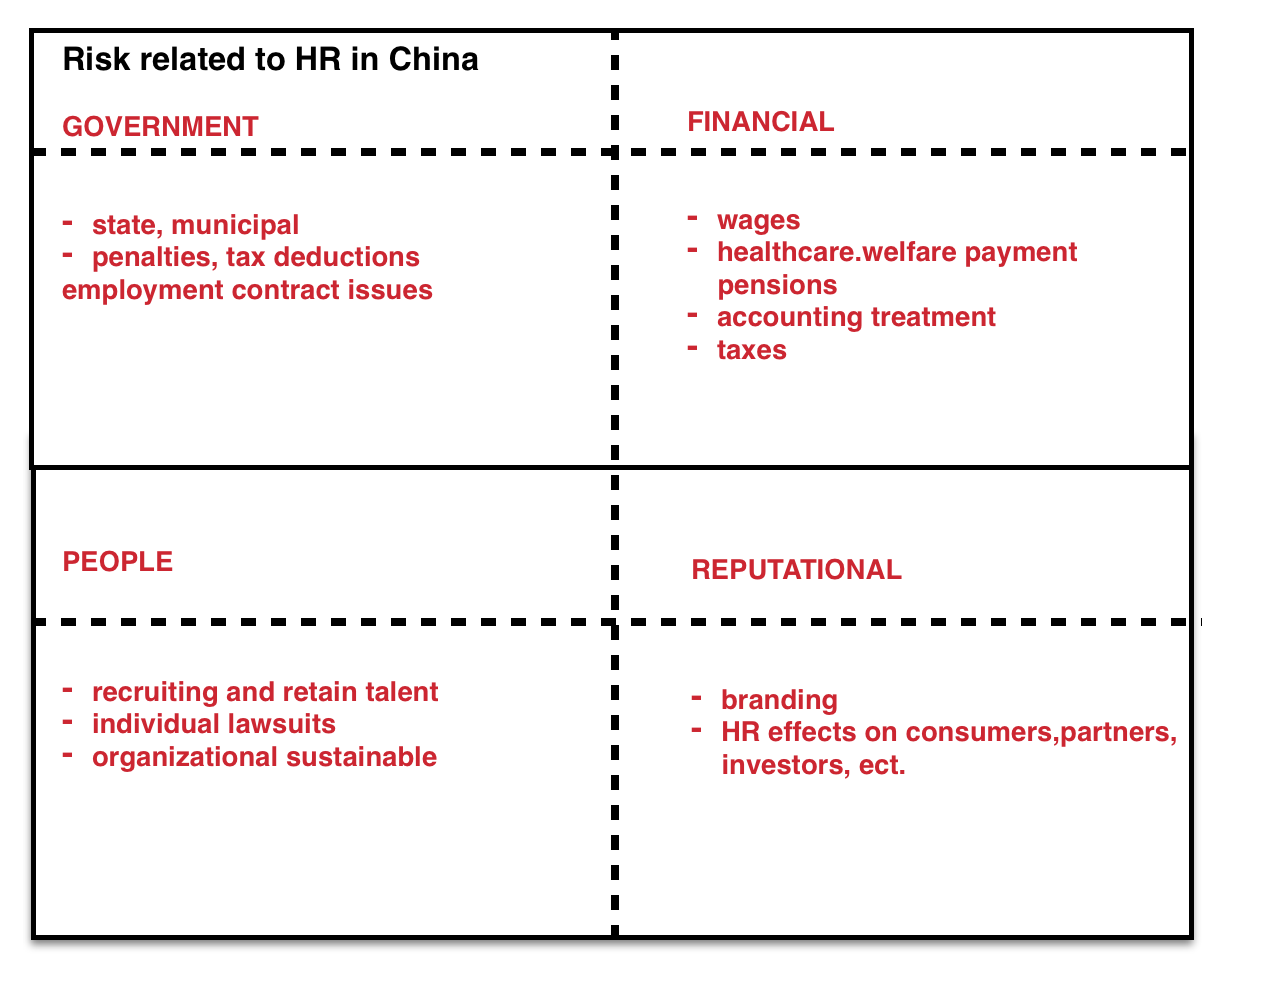 Risk Related to HR in China